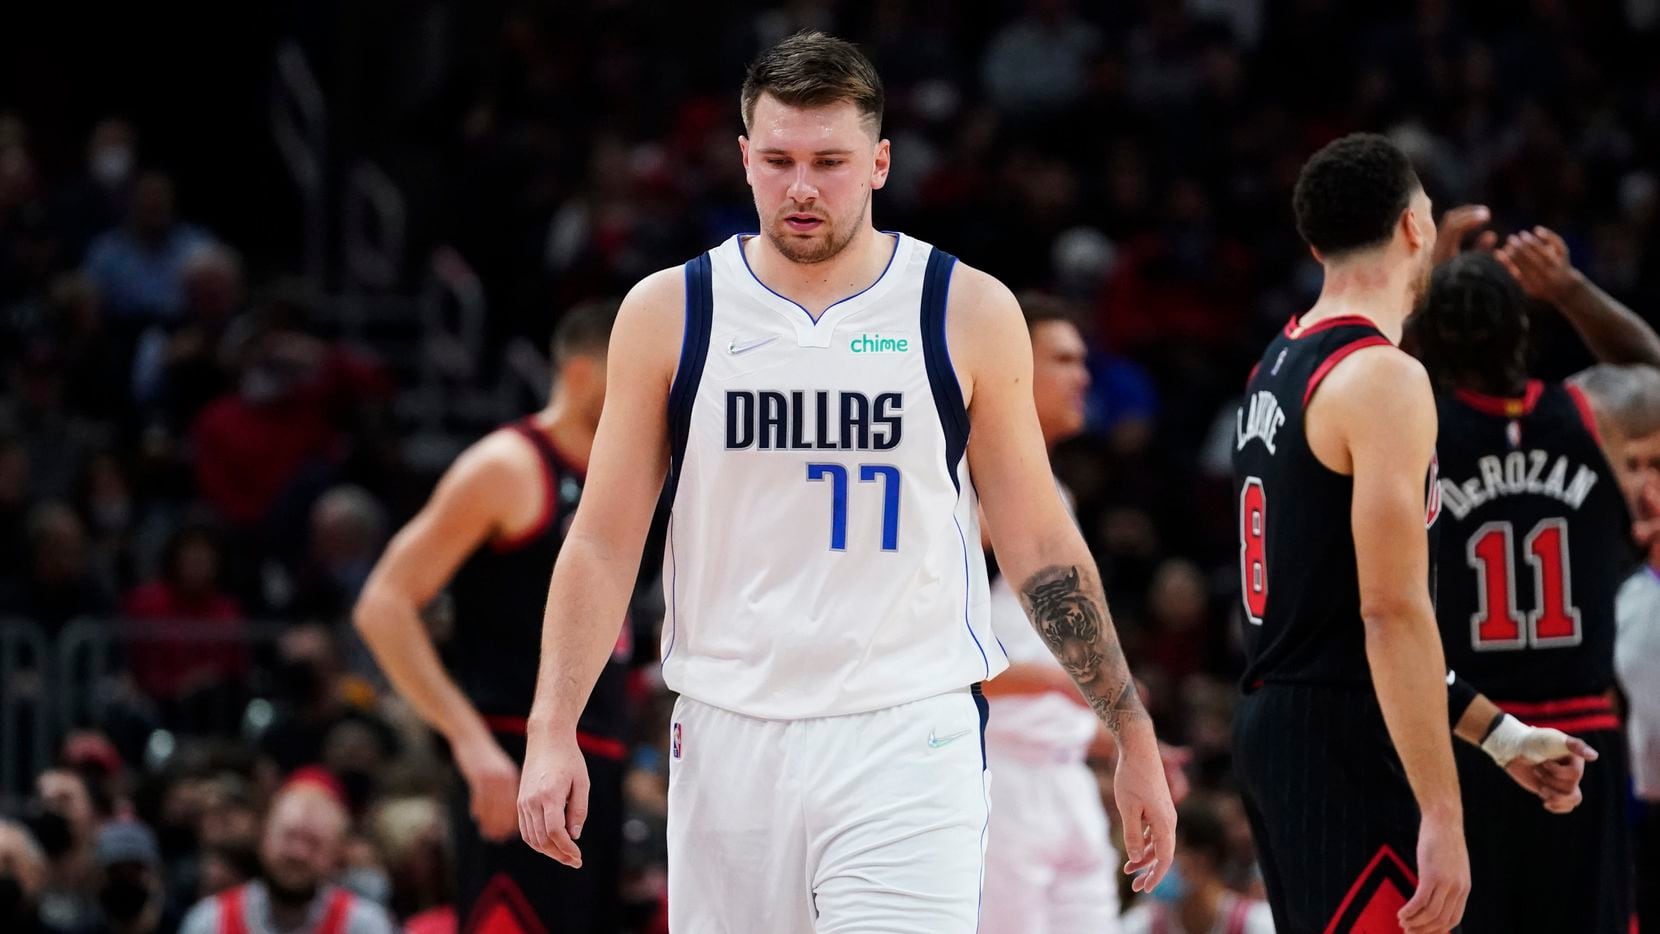 Dallas Mavericks guard Luka Doncic looks down as he walks on the court during the first half of an NBA basketball game against the Chicago Bulls in Chicago, Wednesday, Nov. 10, 2021. The Chicago Bulls won 117-107.